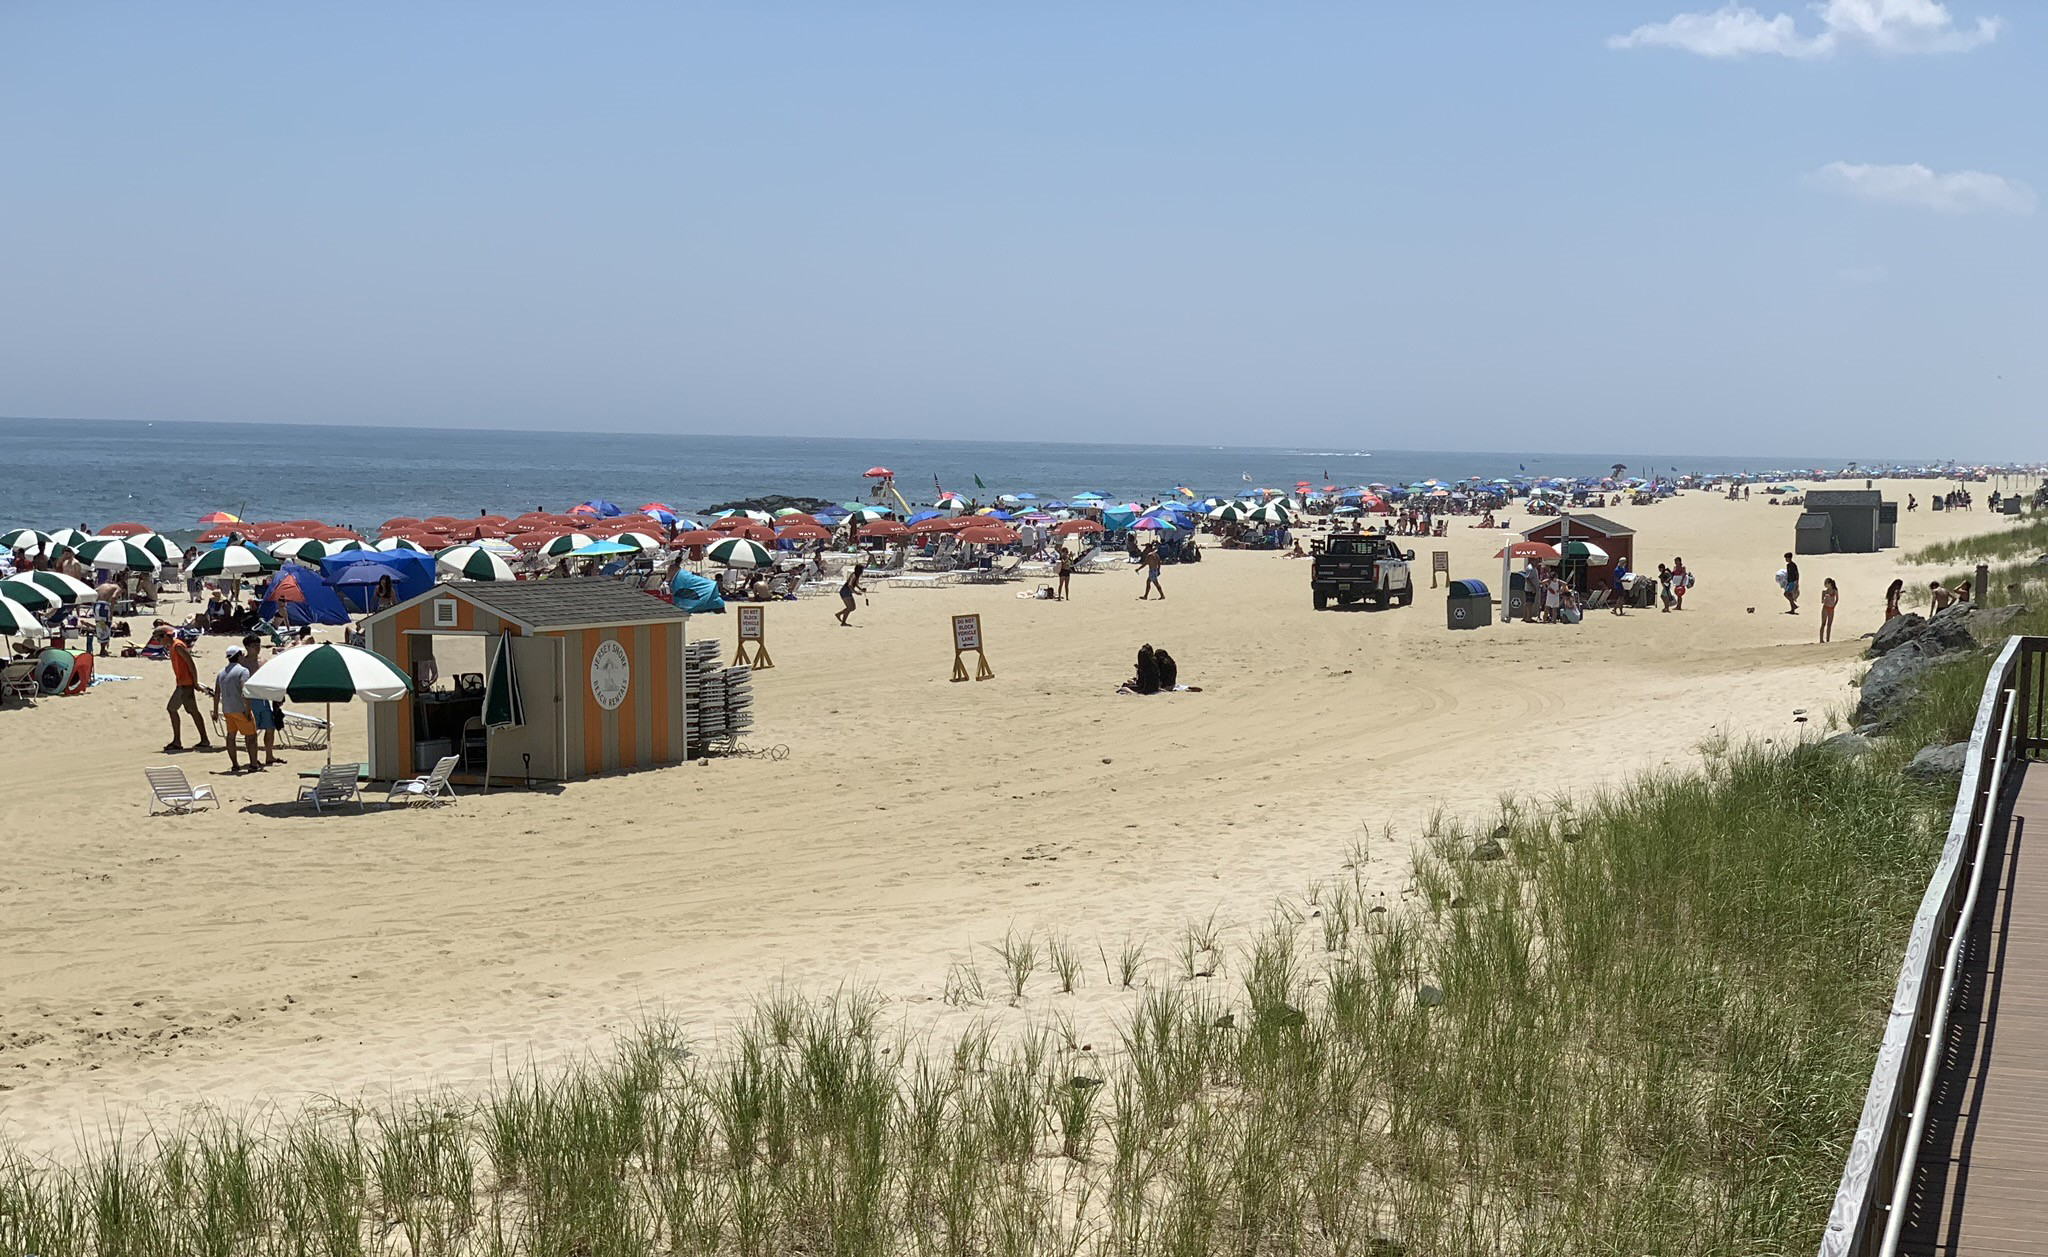 Long Branch Named One Of NJ's Best Day Trip Towns